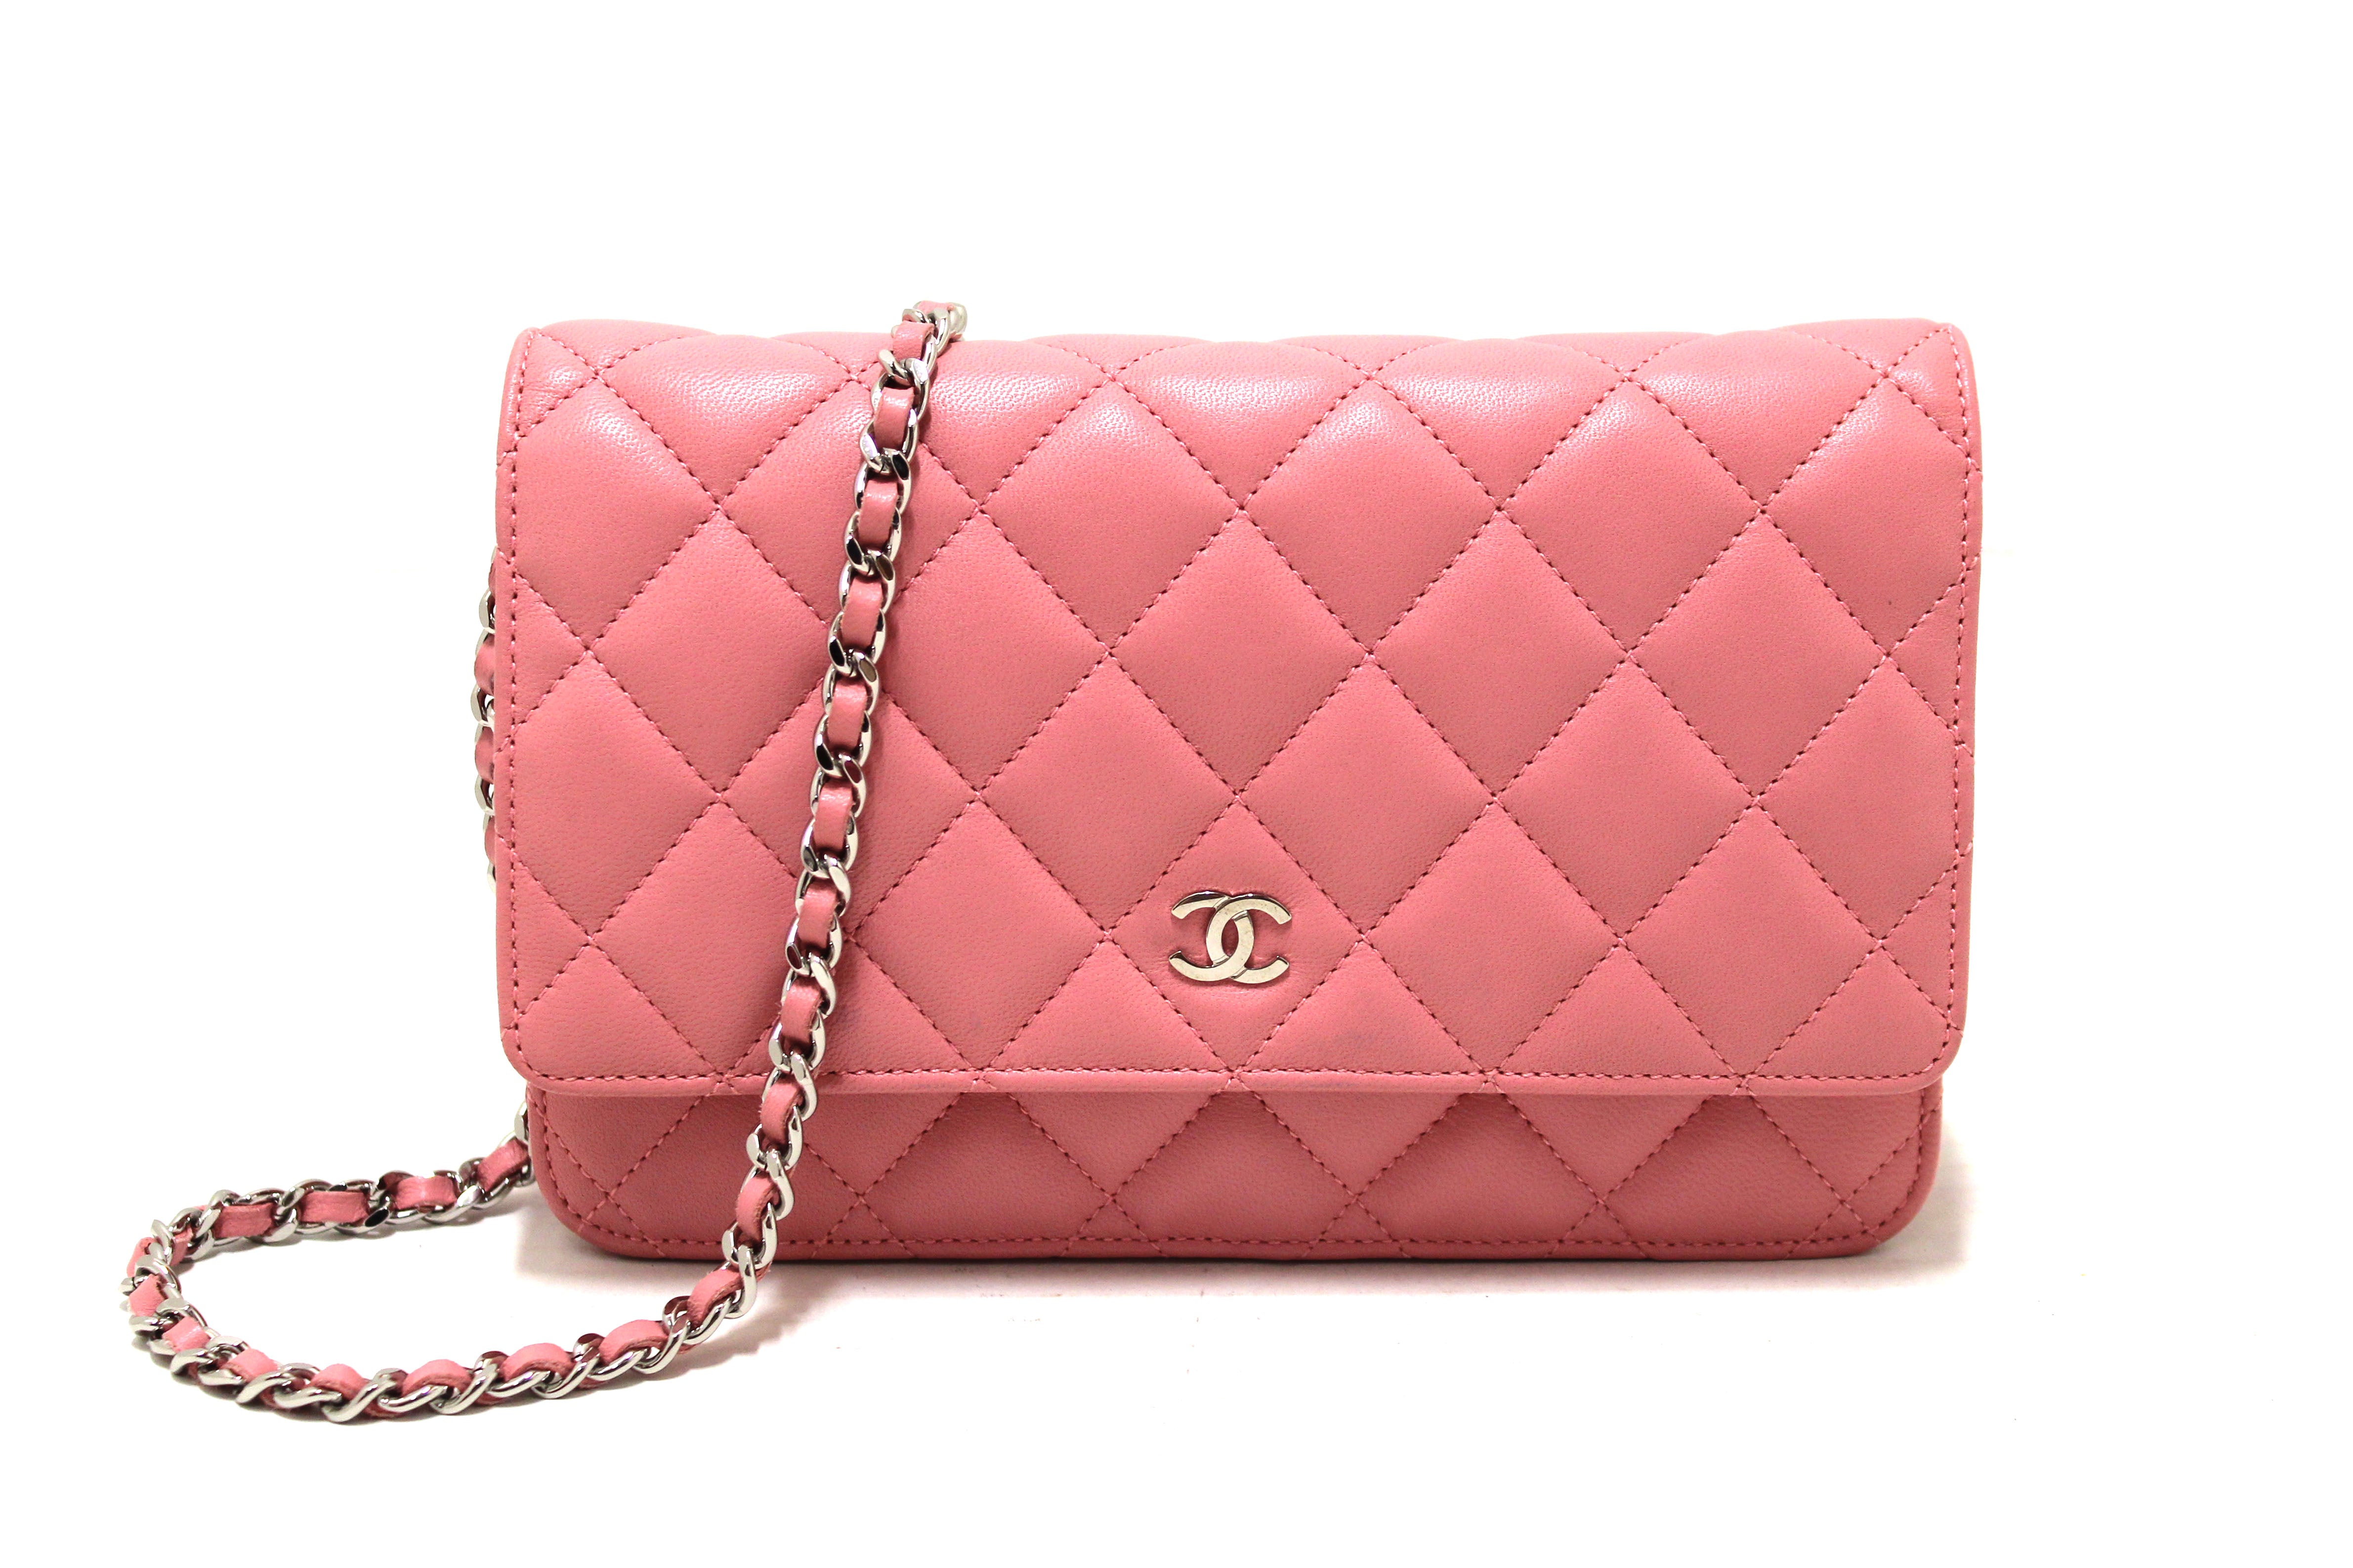 Chanel 19 Wallet On Chain WOC Pink Lambskin Leather – Italy Station